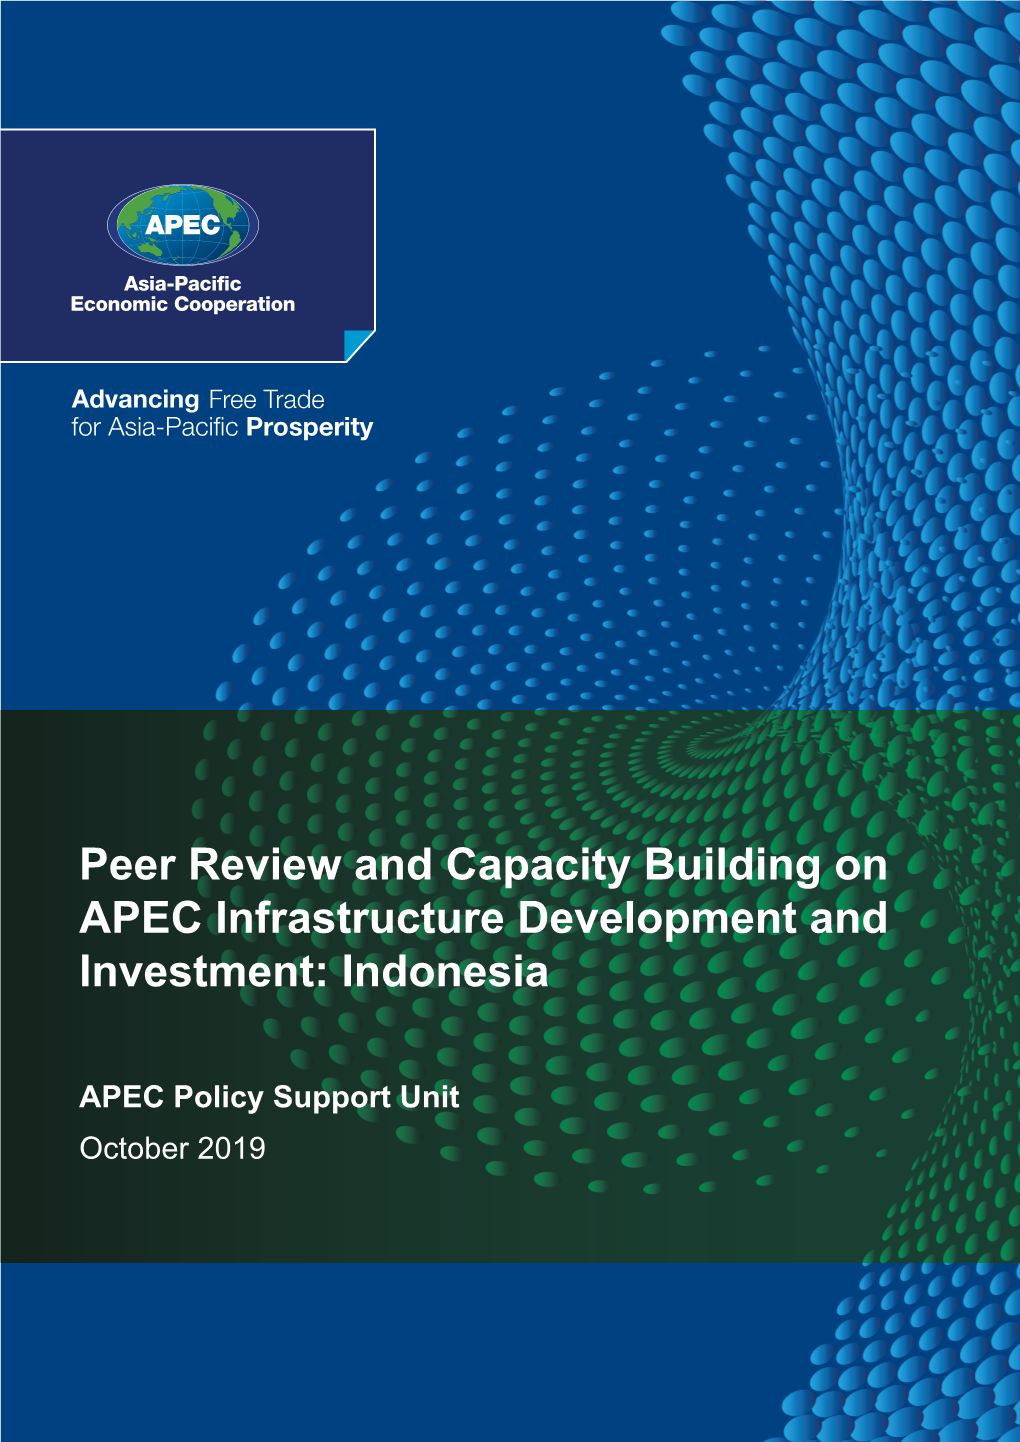 Peer Review and Capacity Building on APEC Infrastructure Development and Investment: Indonesia